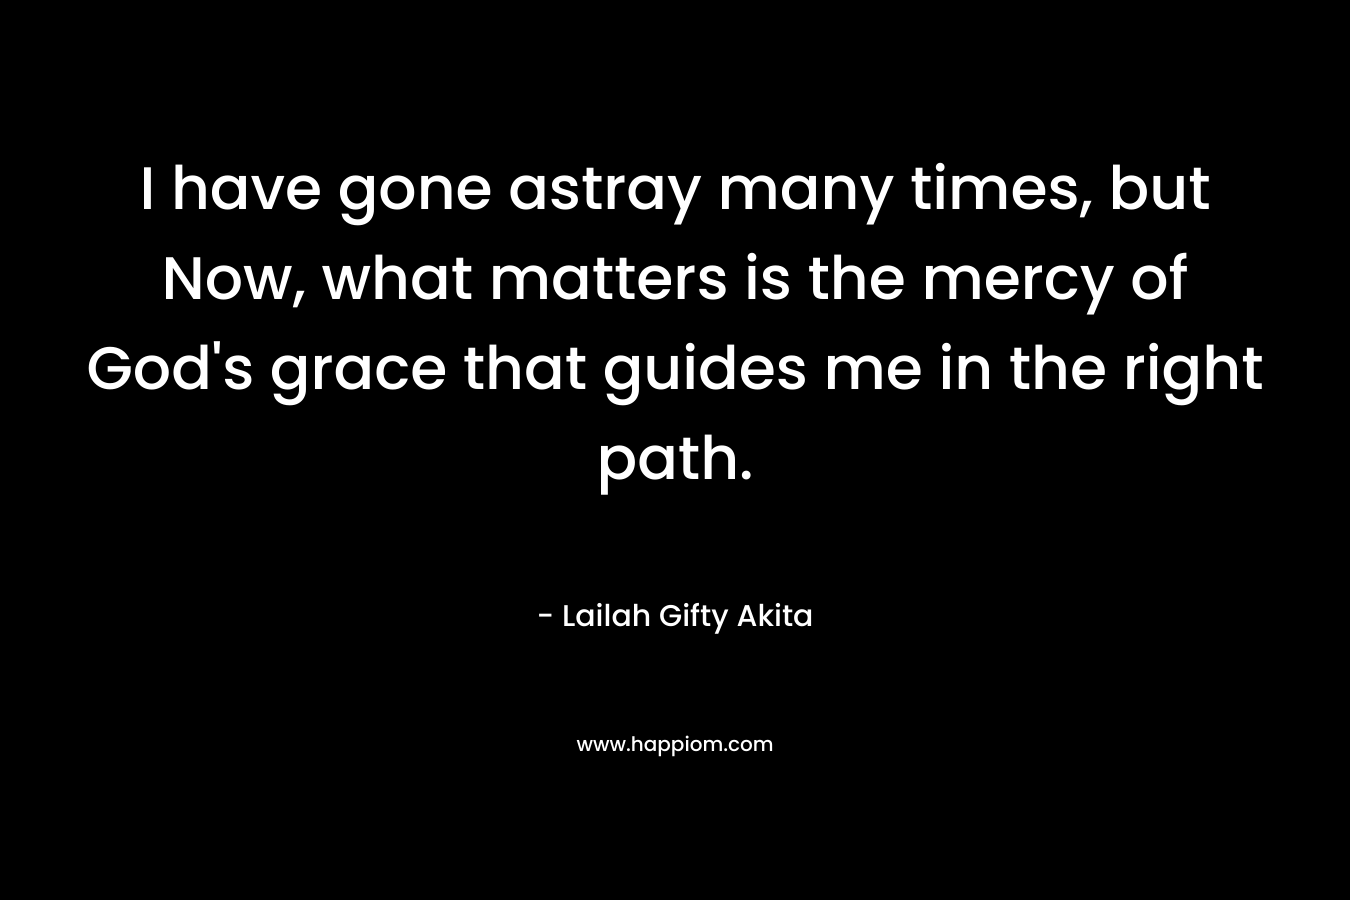 I have gone astray many times, but Now, what matters is the mercy of God’s grace that guides me in the right path. – Lailah Gifty Akita